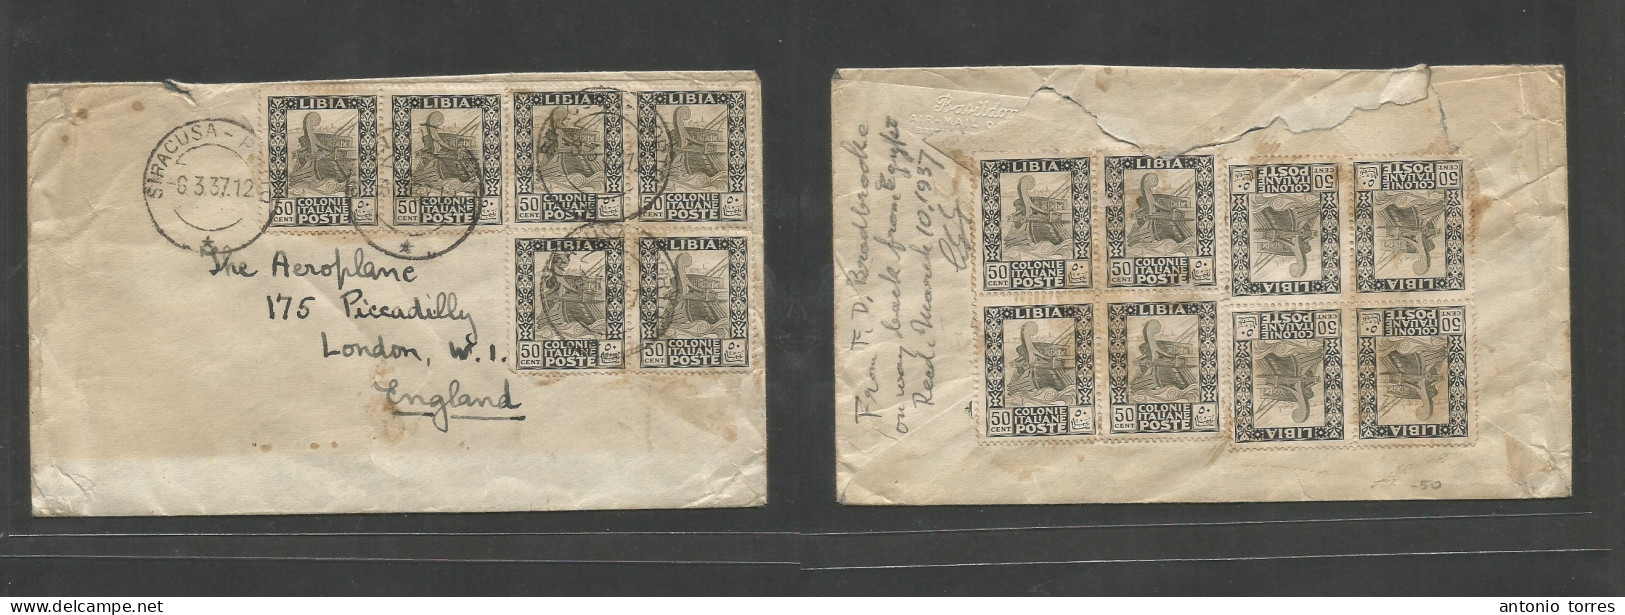 Libia. 1937 (6 March) Italian Admin. Siracusa - England, London. Multifkd Env Front And Reverse At 700c Rate. Fine. - Libye